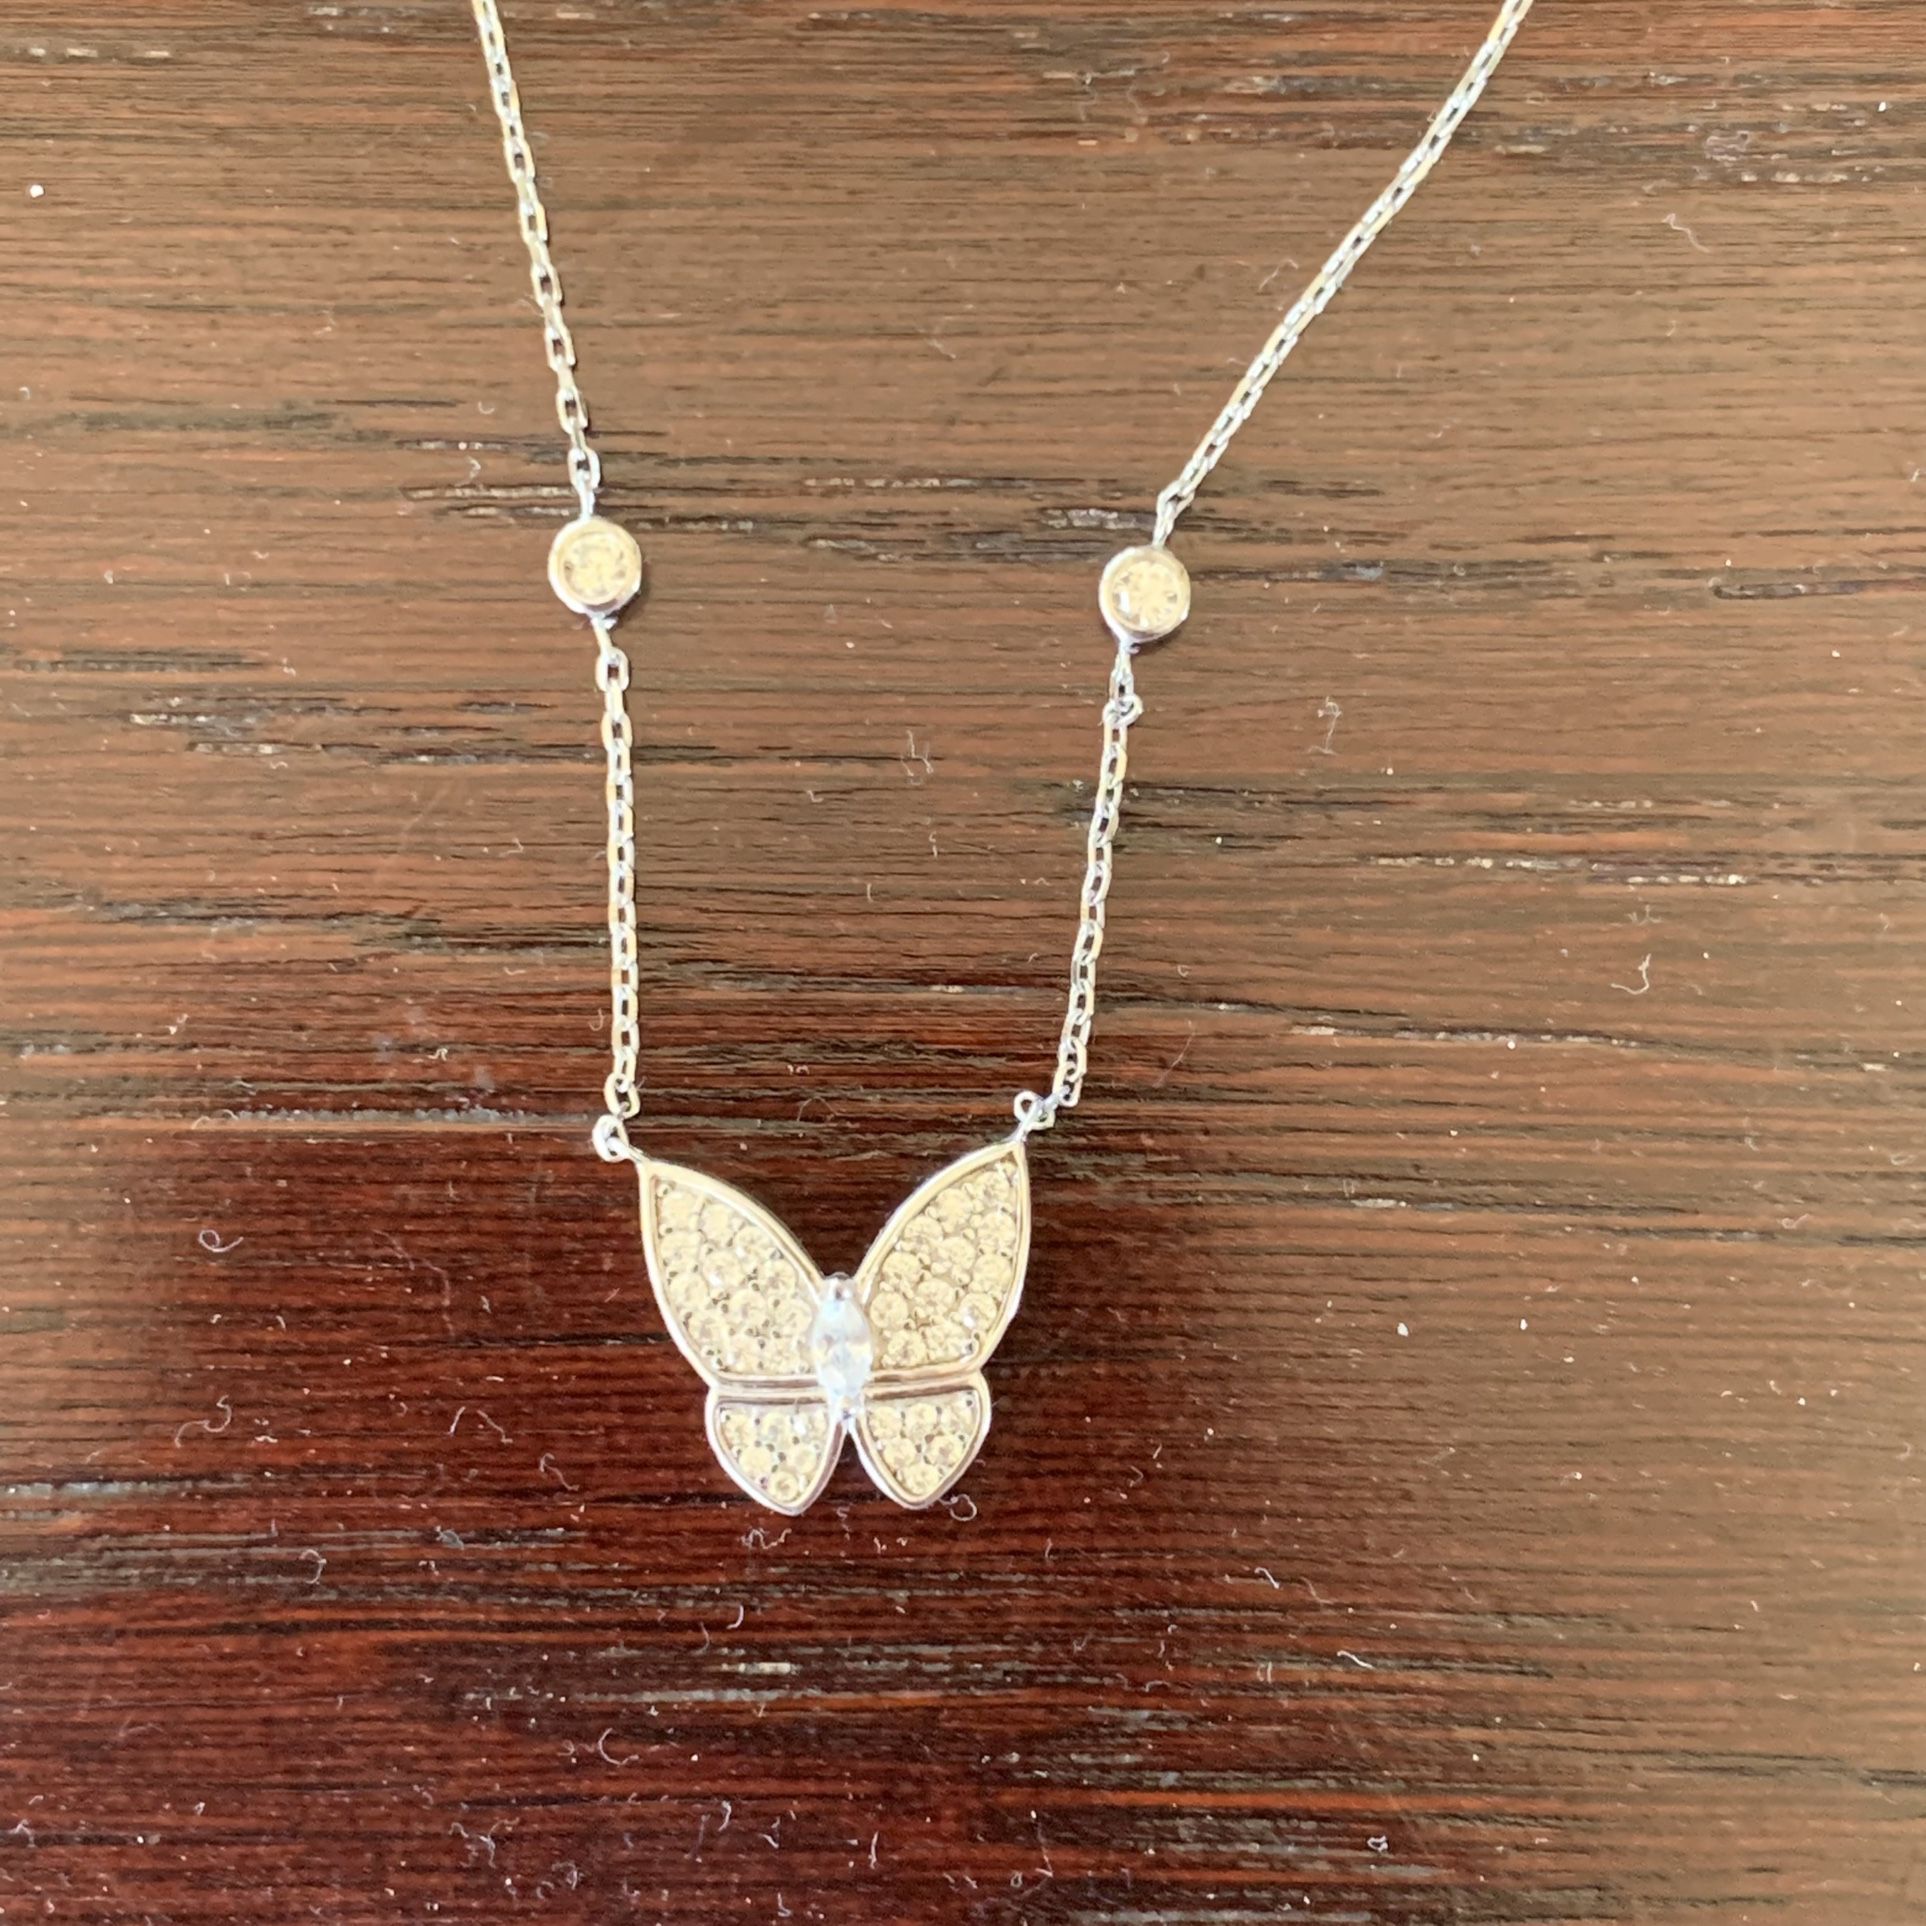 Sterling silver butterfly necklace with cubic zirconium jewels